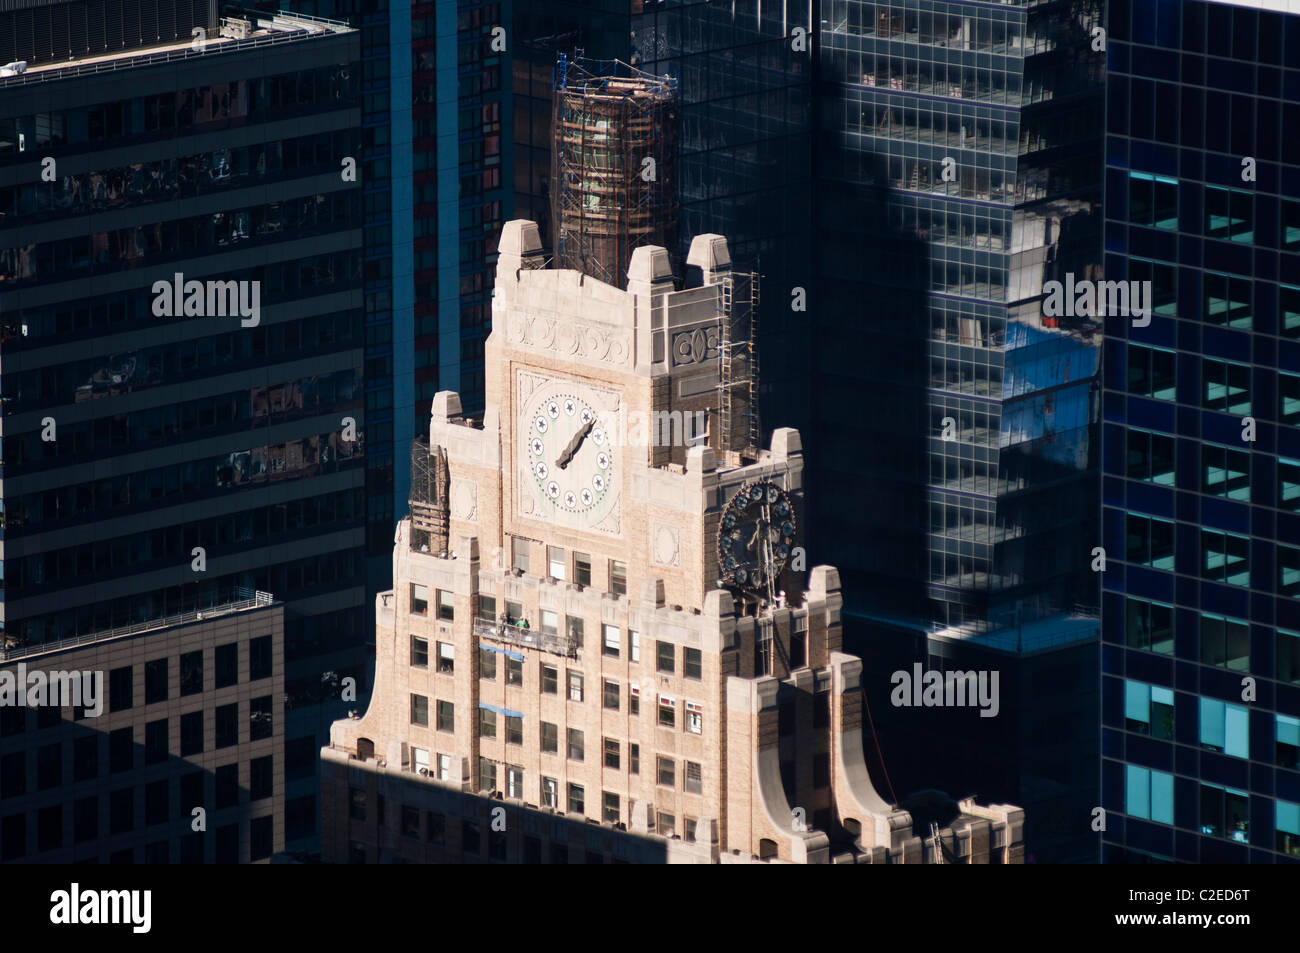 Paramount Theater or Paramount Building with clock on Time Square seen from Rockefeller Center Top of The Rock, Manhattan, NYC Stock Photo